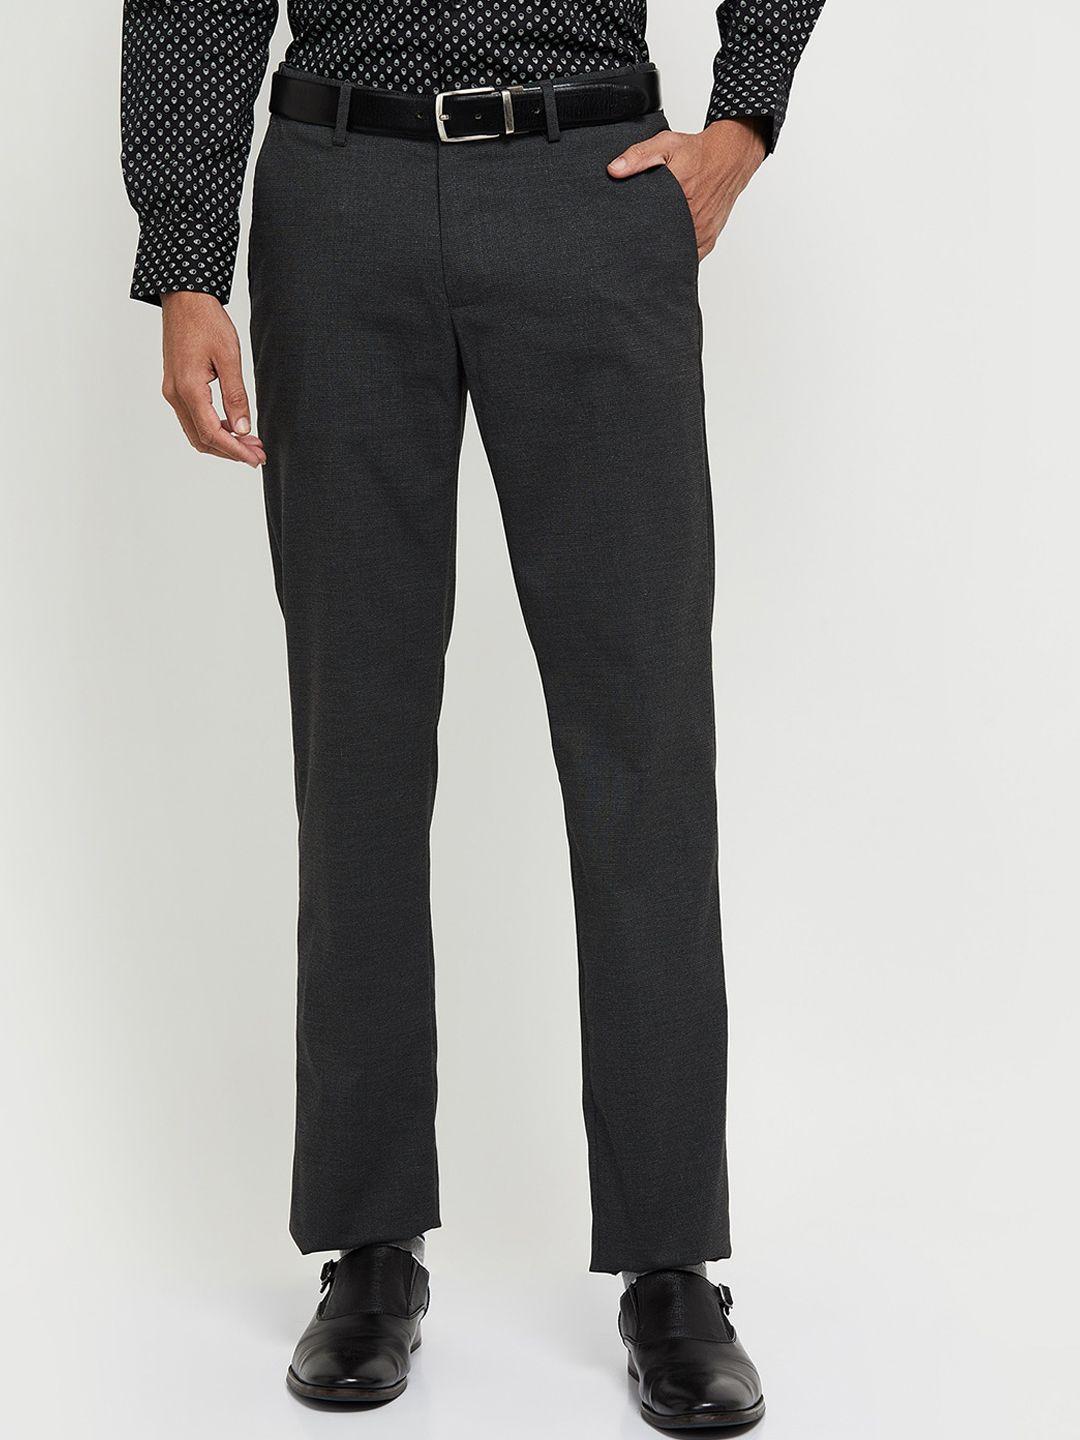 max men charcoal formal trousers